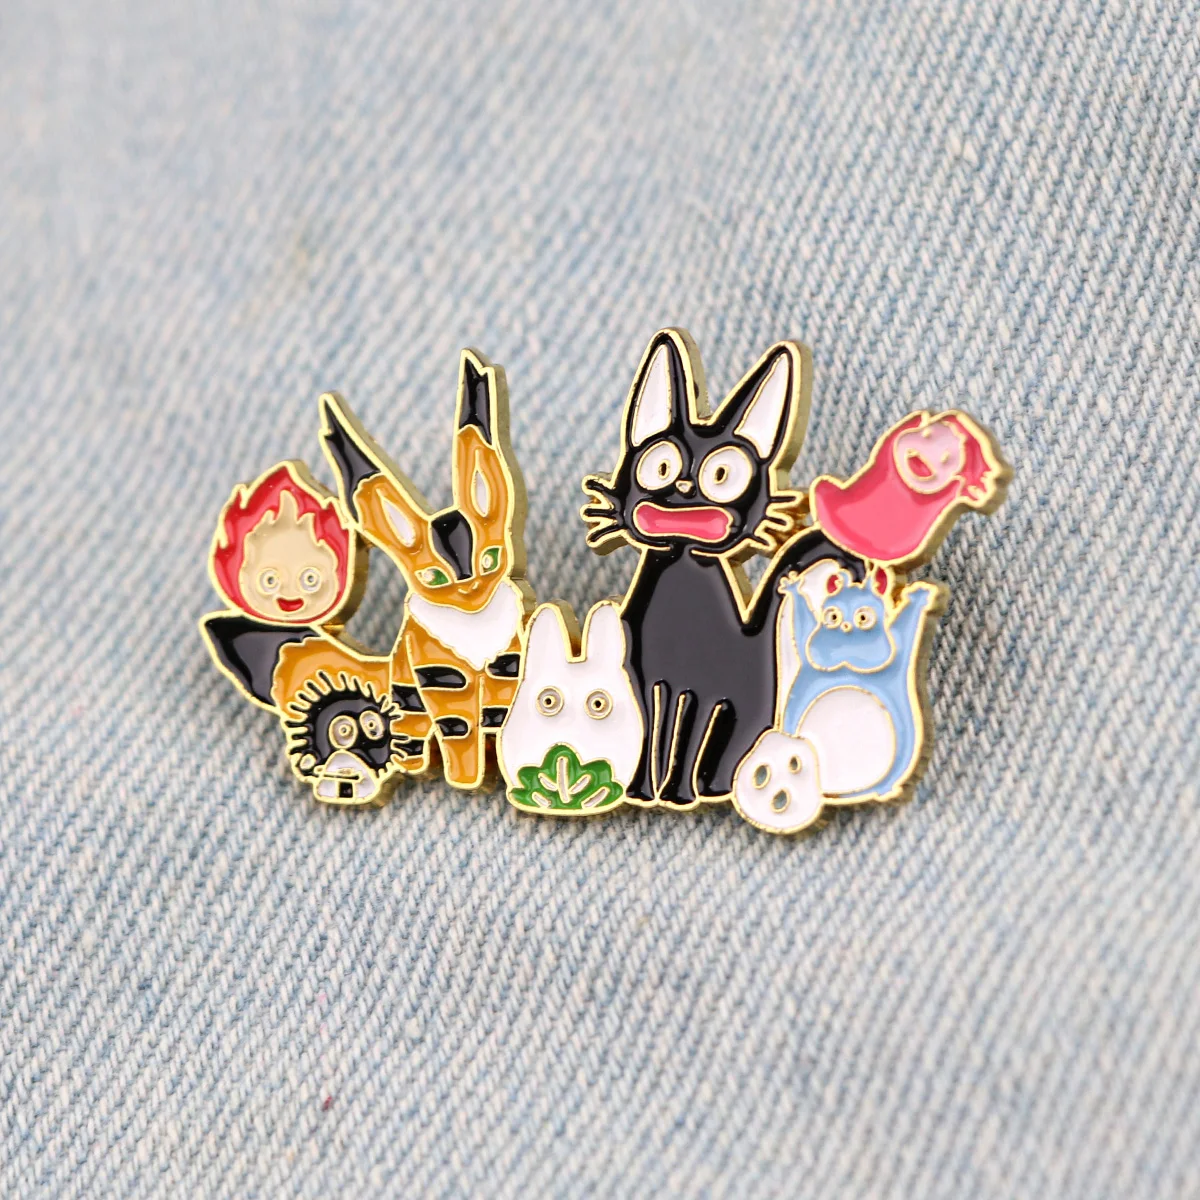 

Anime Collections Cat Enamel Pins Women's Brooches on Clothes Lapel Pins for Backpacks Briefcase Badges Cute Jewelry Accessories